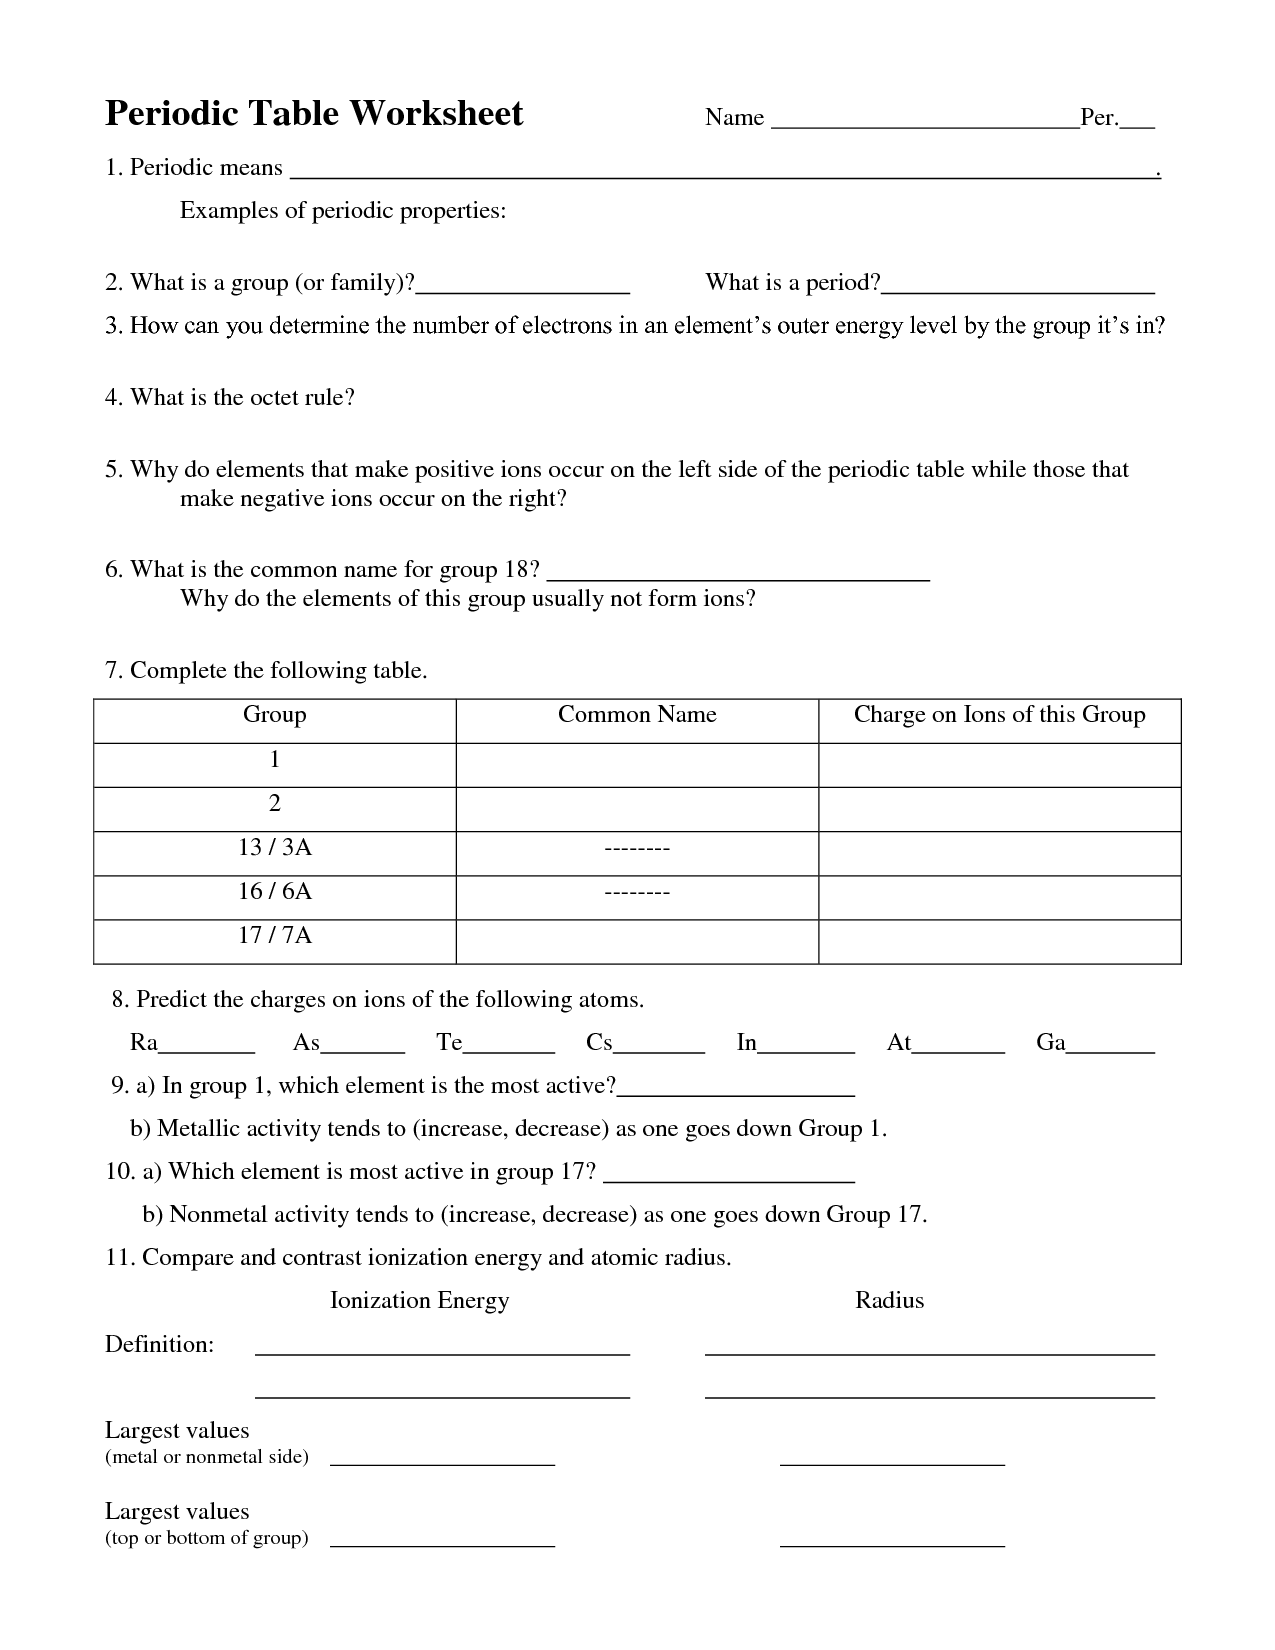 periodic table worksheet chemistry answers